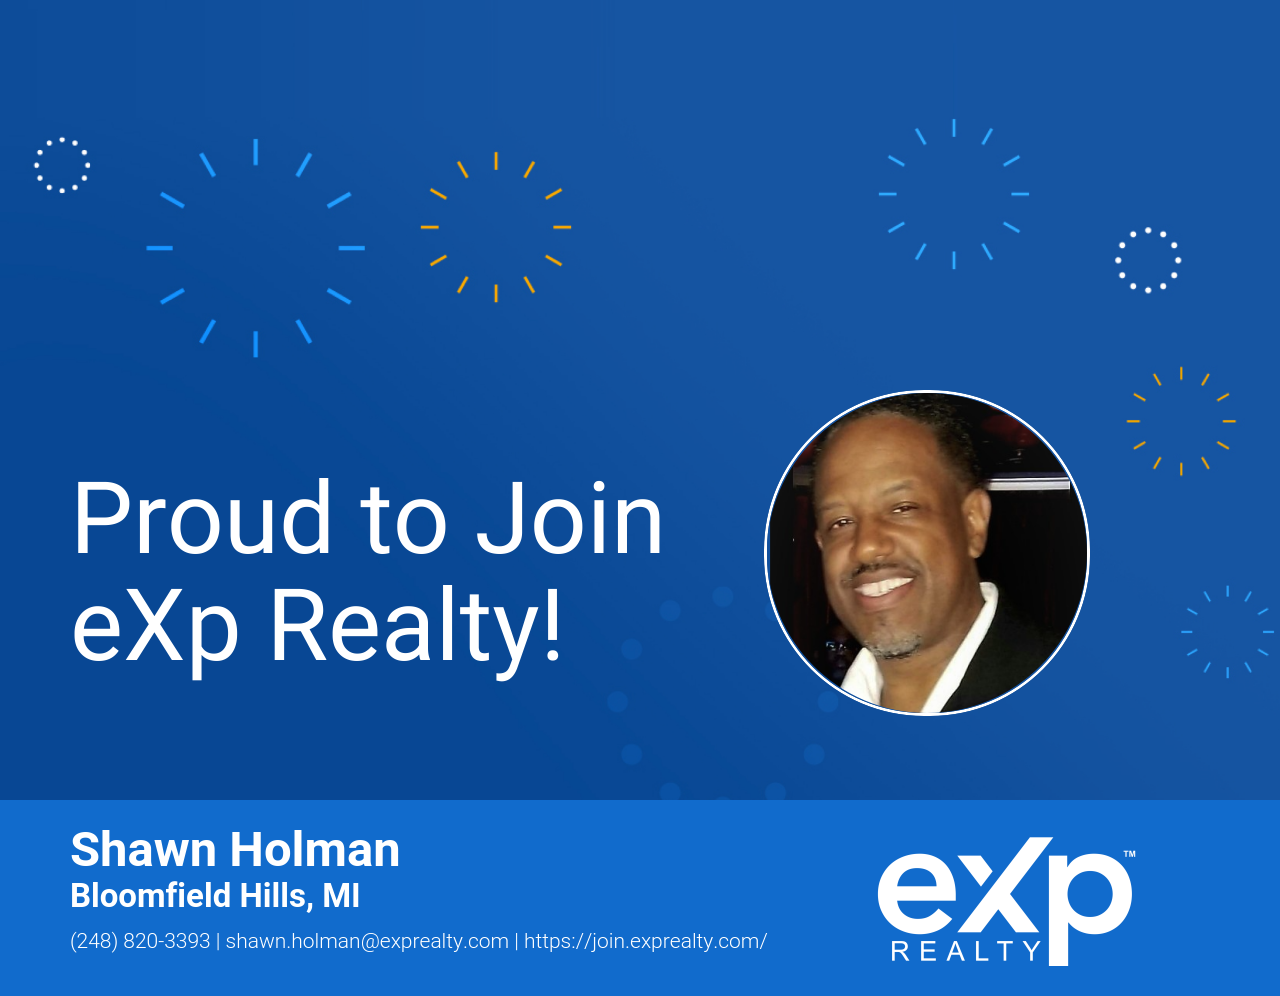 Shawn Holman Joined eXp Realty!